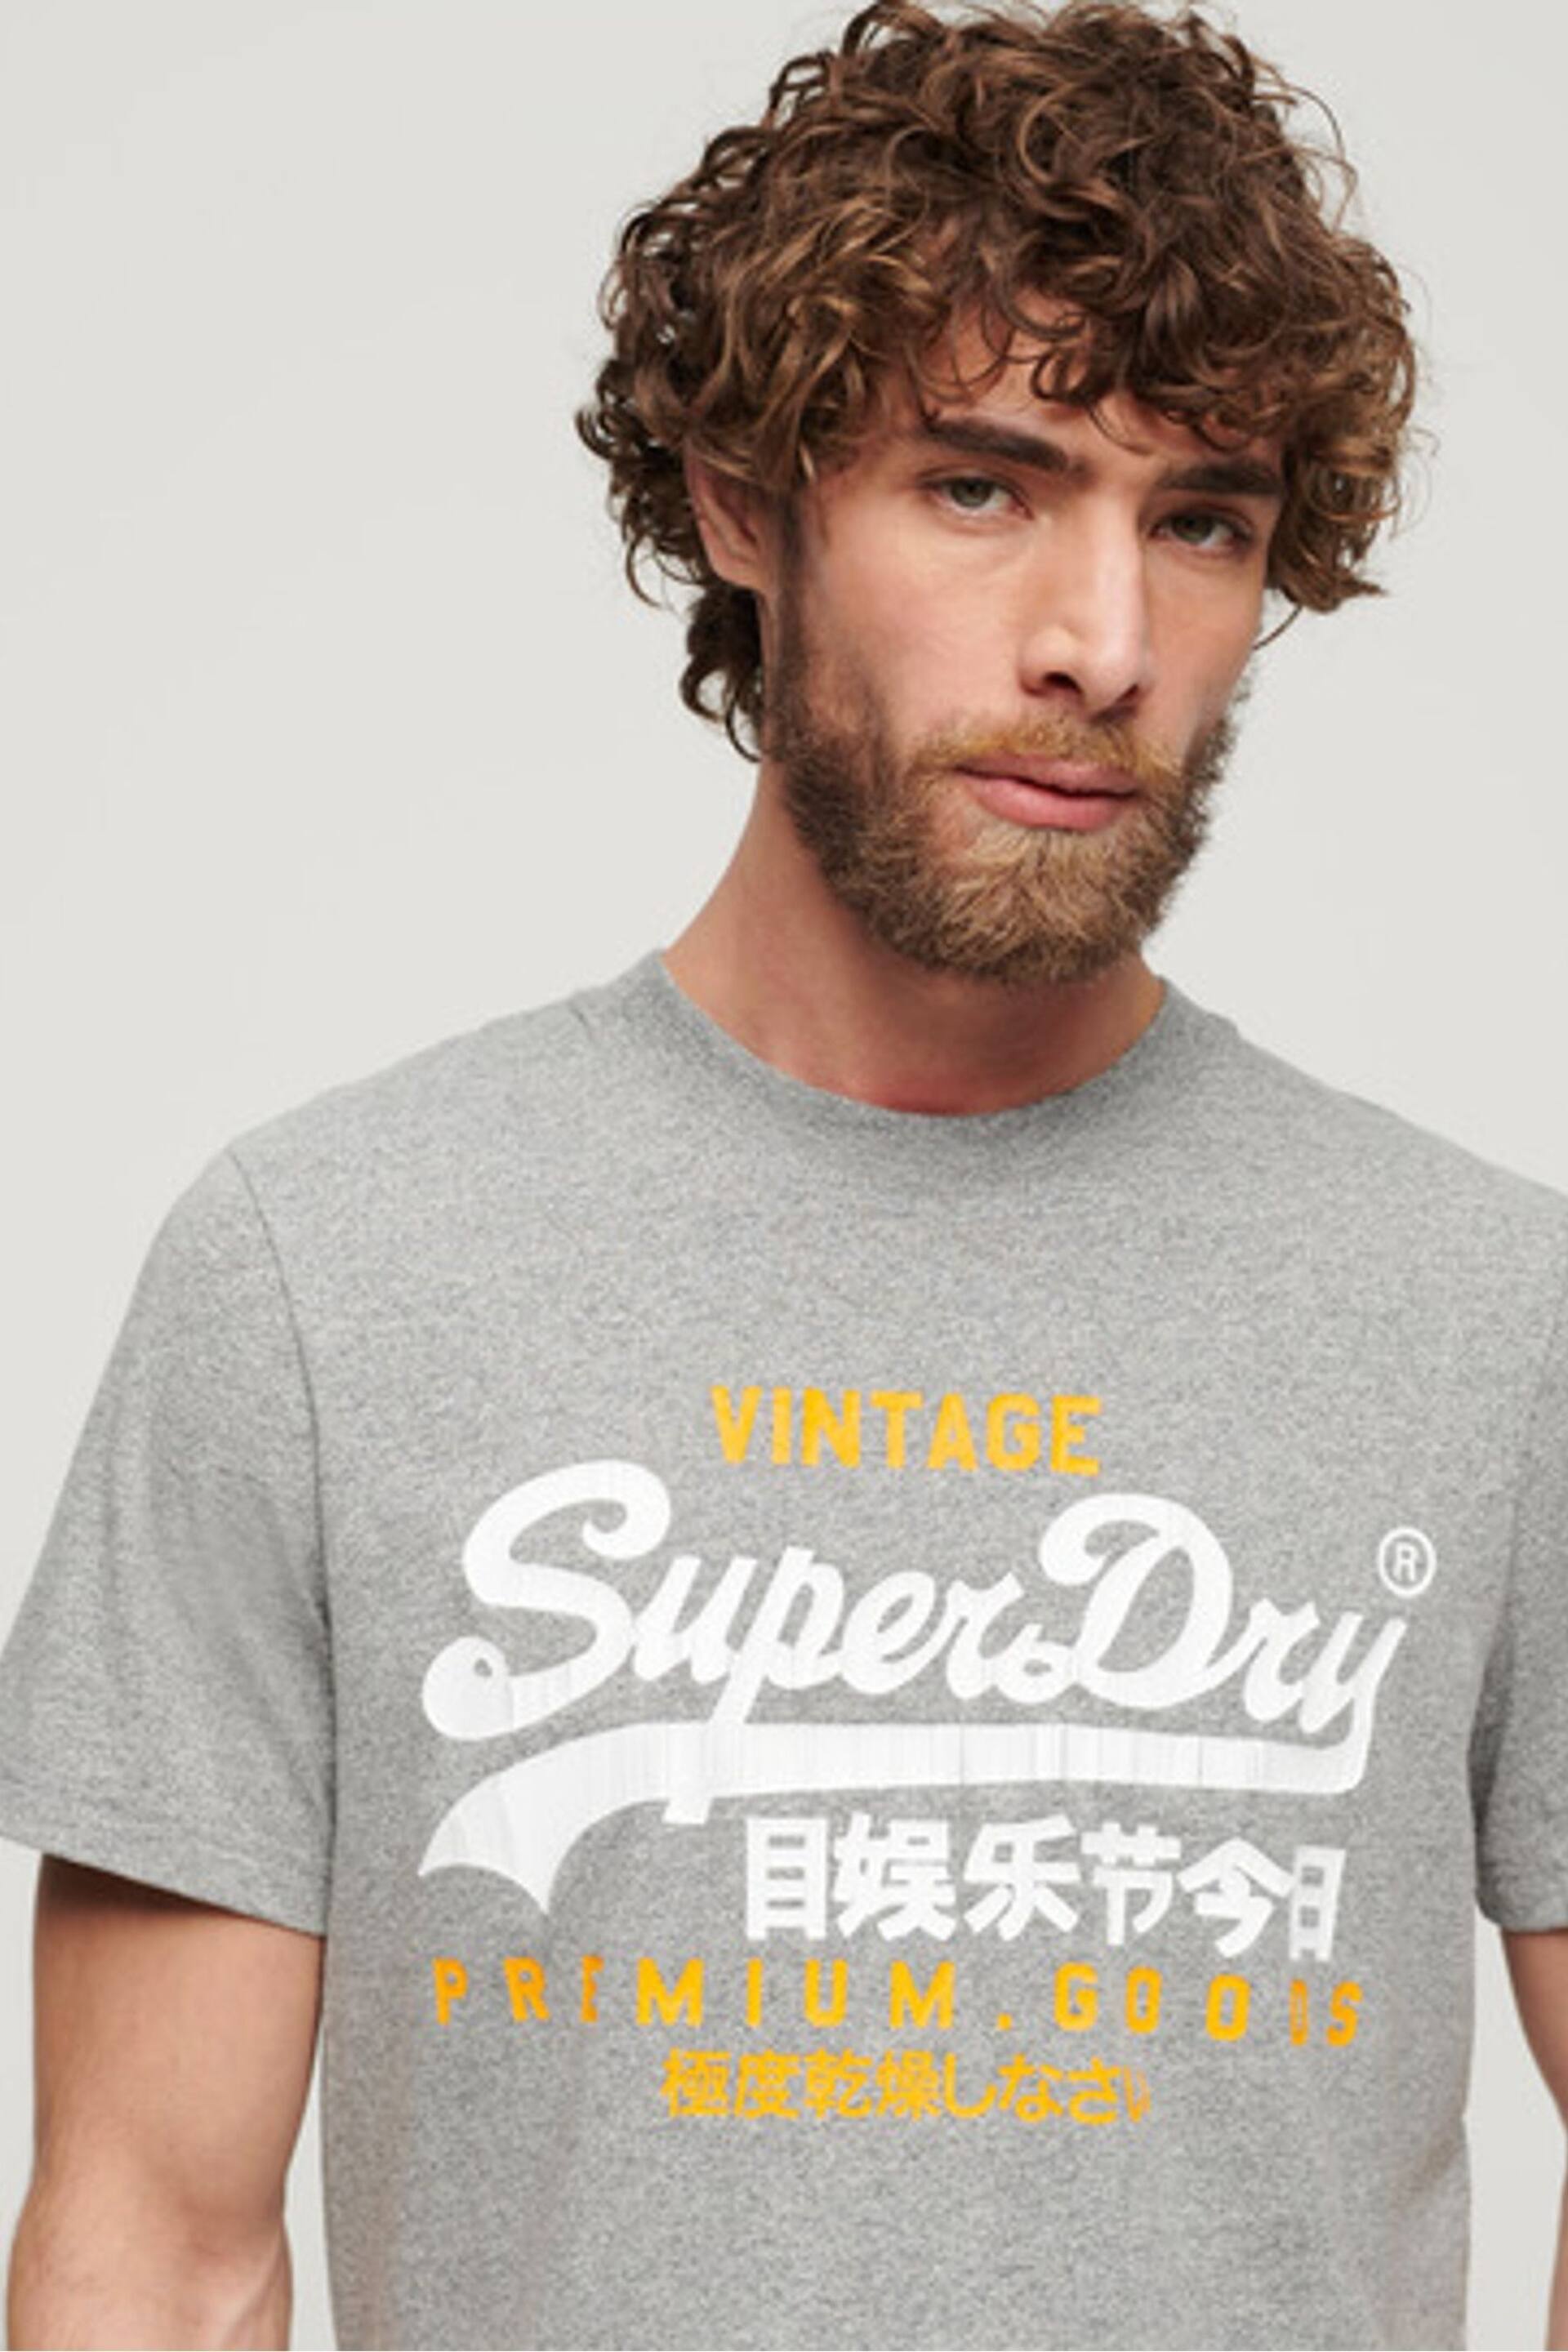 Superdry Grey Vl Duo T-Shirt - Image 4 of 7